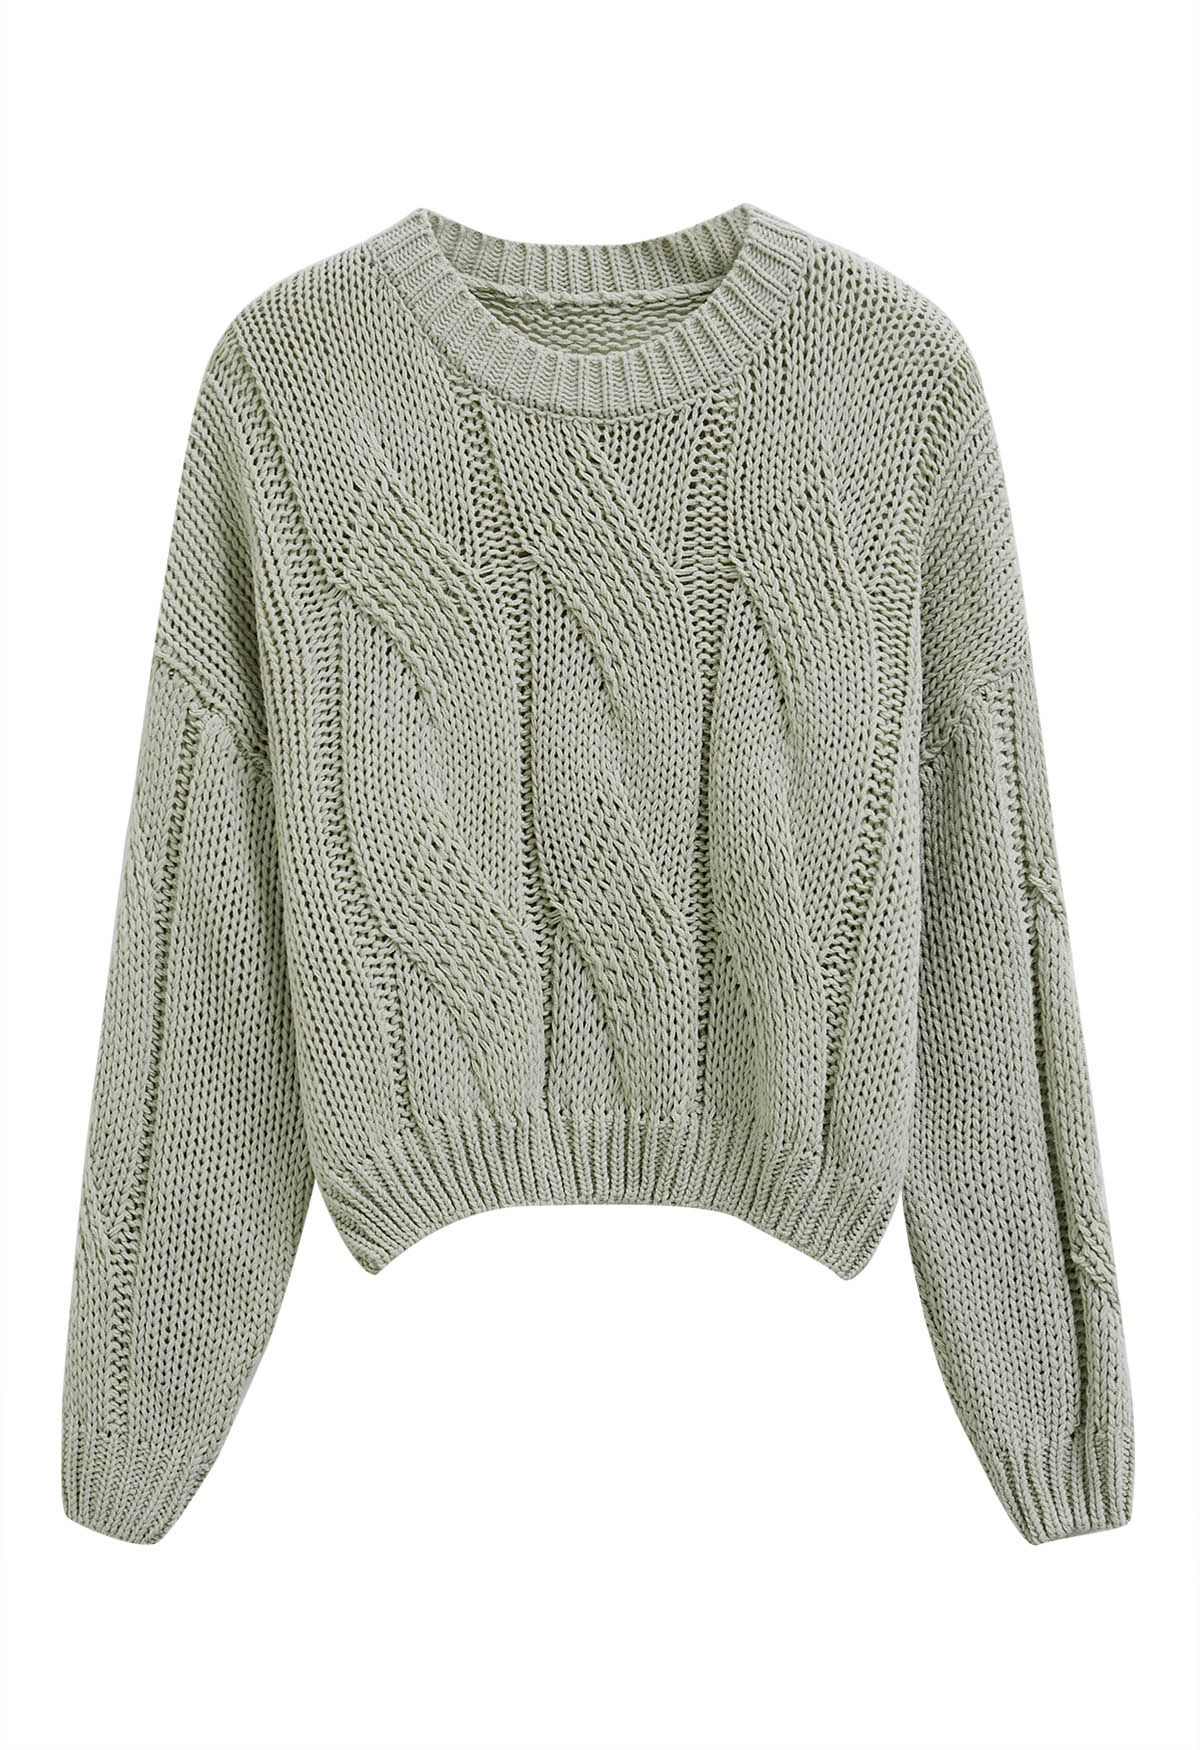 Casual Elegance Cable Knit Sweater in Pea Green - Retro, Indie and